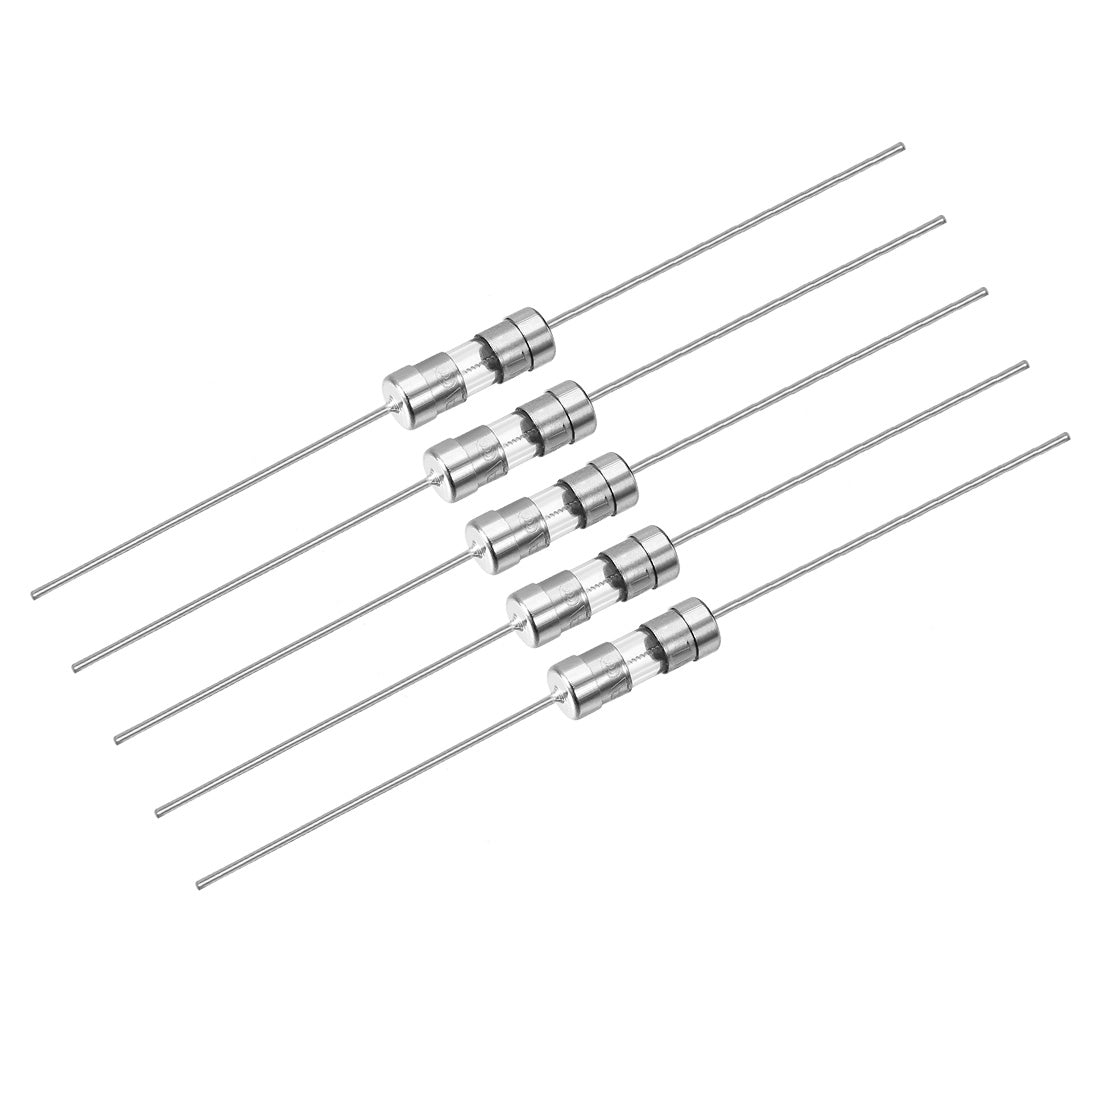 uxcell Uxcell Slow Blow Fuse Time Delay Axial Lead Glass Fuses 3.6mm x 10mm 250V T2A 5Pcs